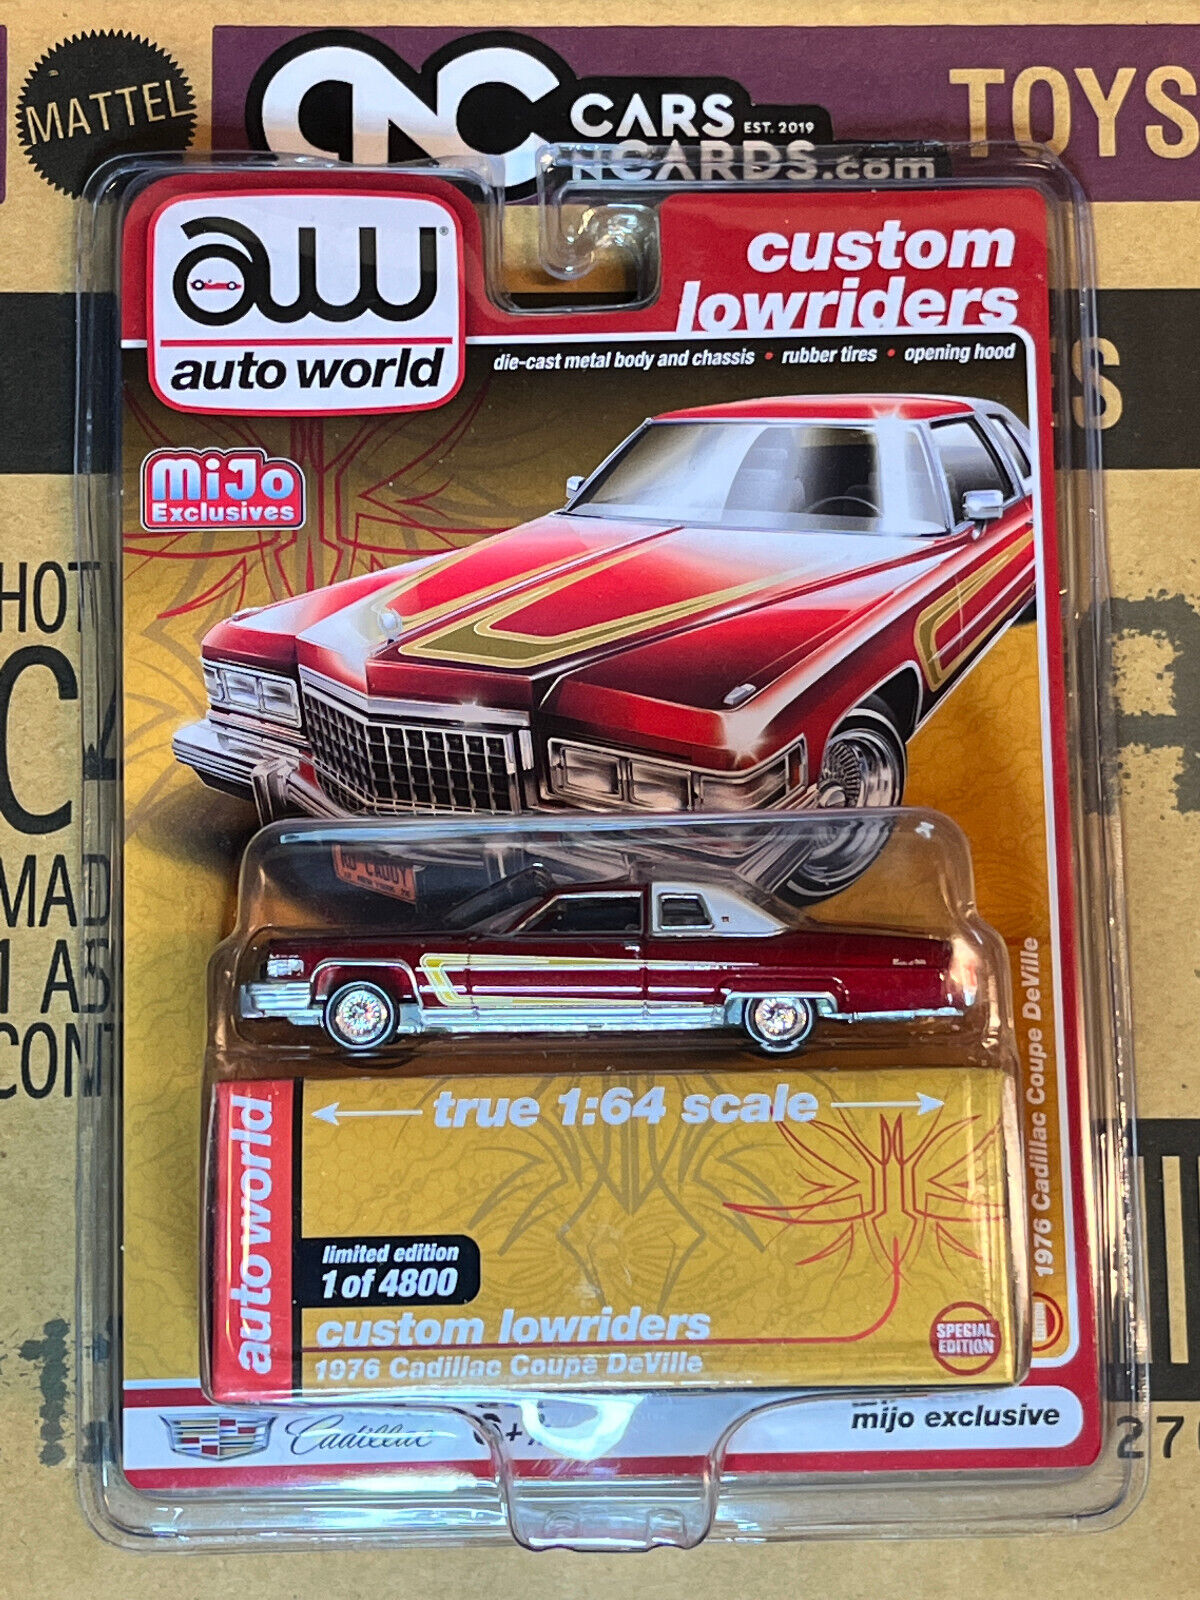 Auto World Mijo Exclusives Custom Lowriders 1976 Cadillac Coupe DeVille Brown